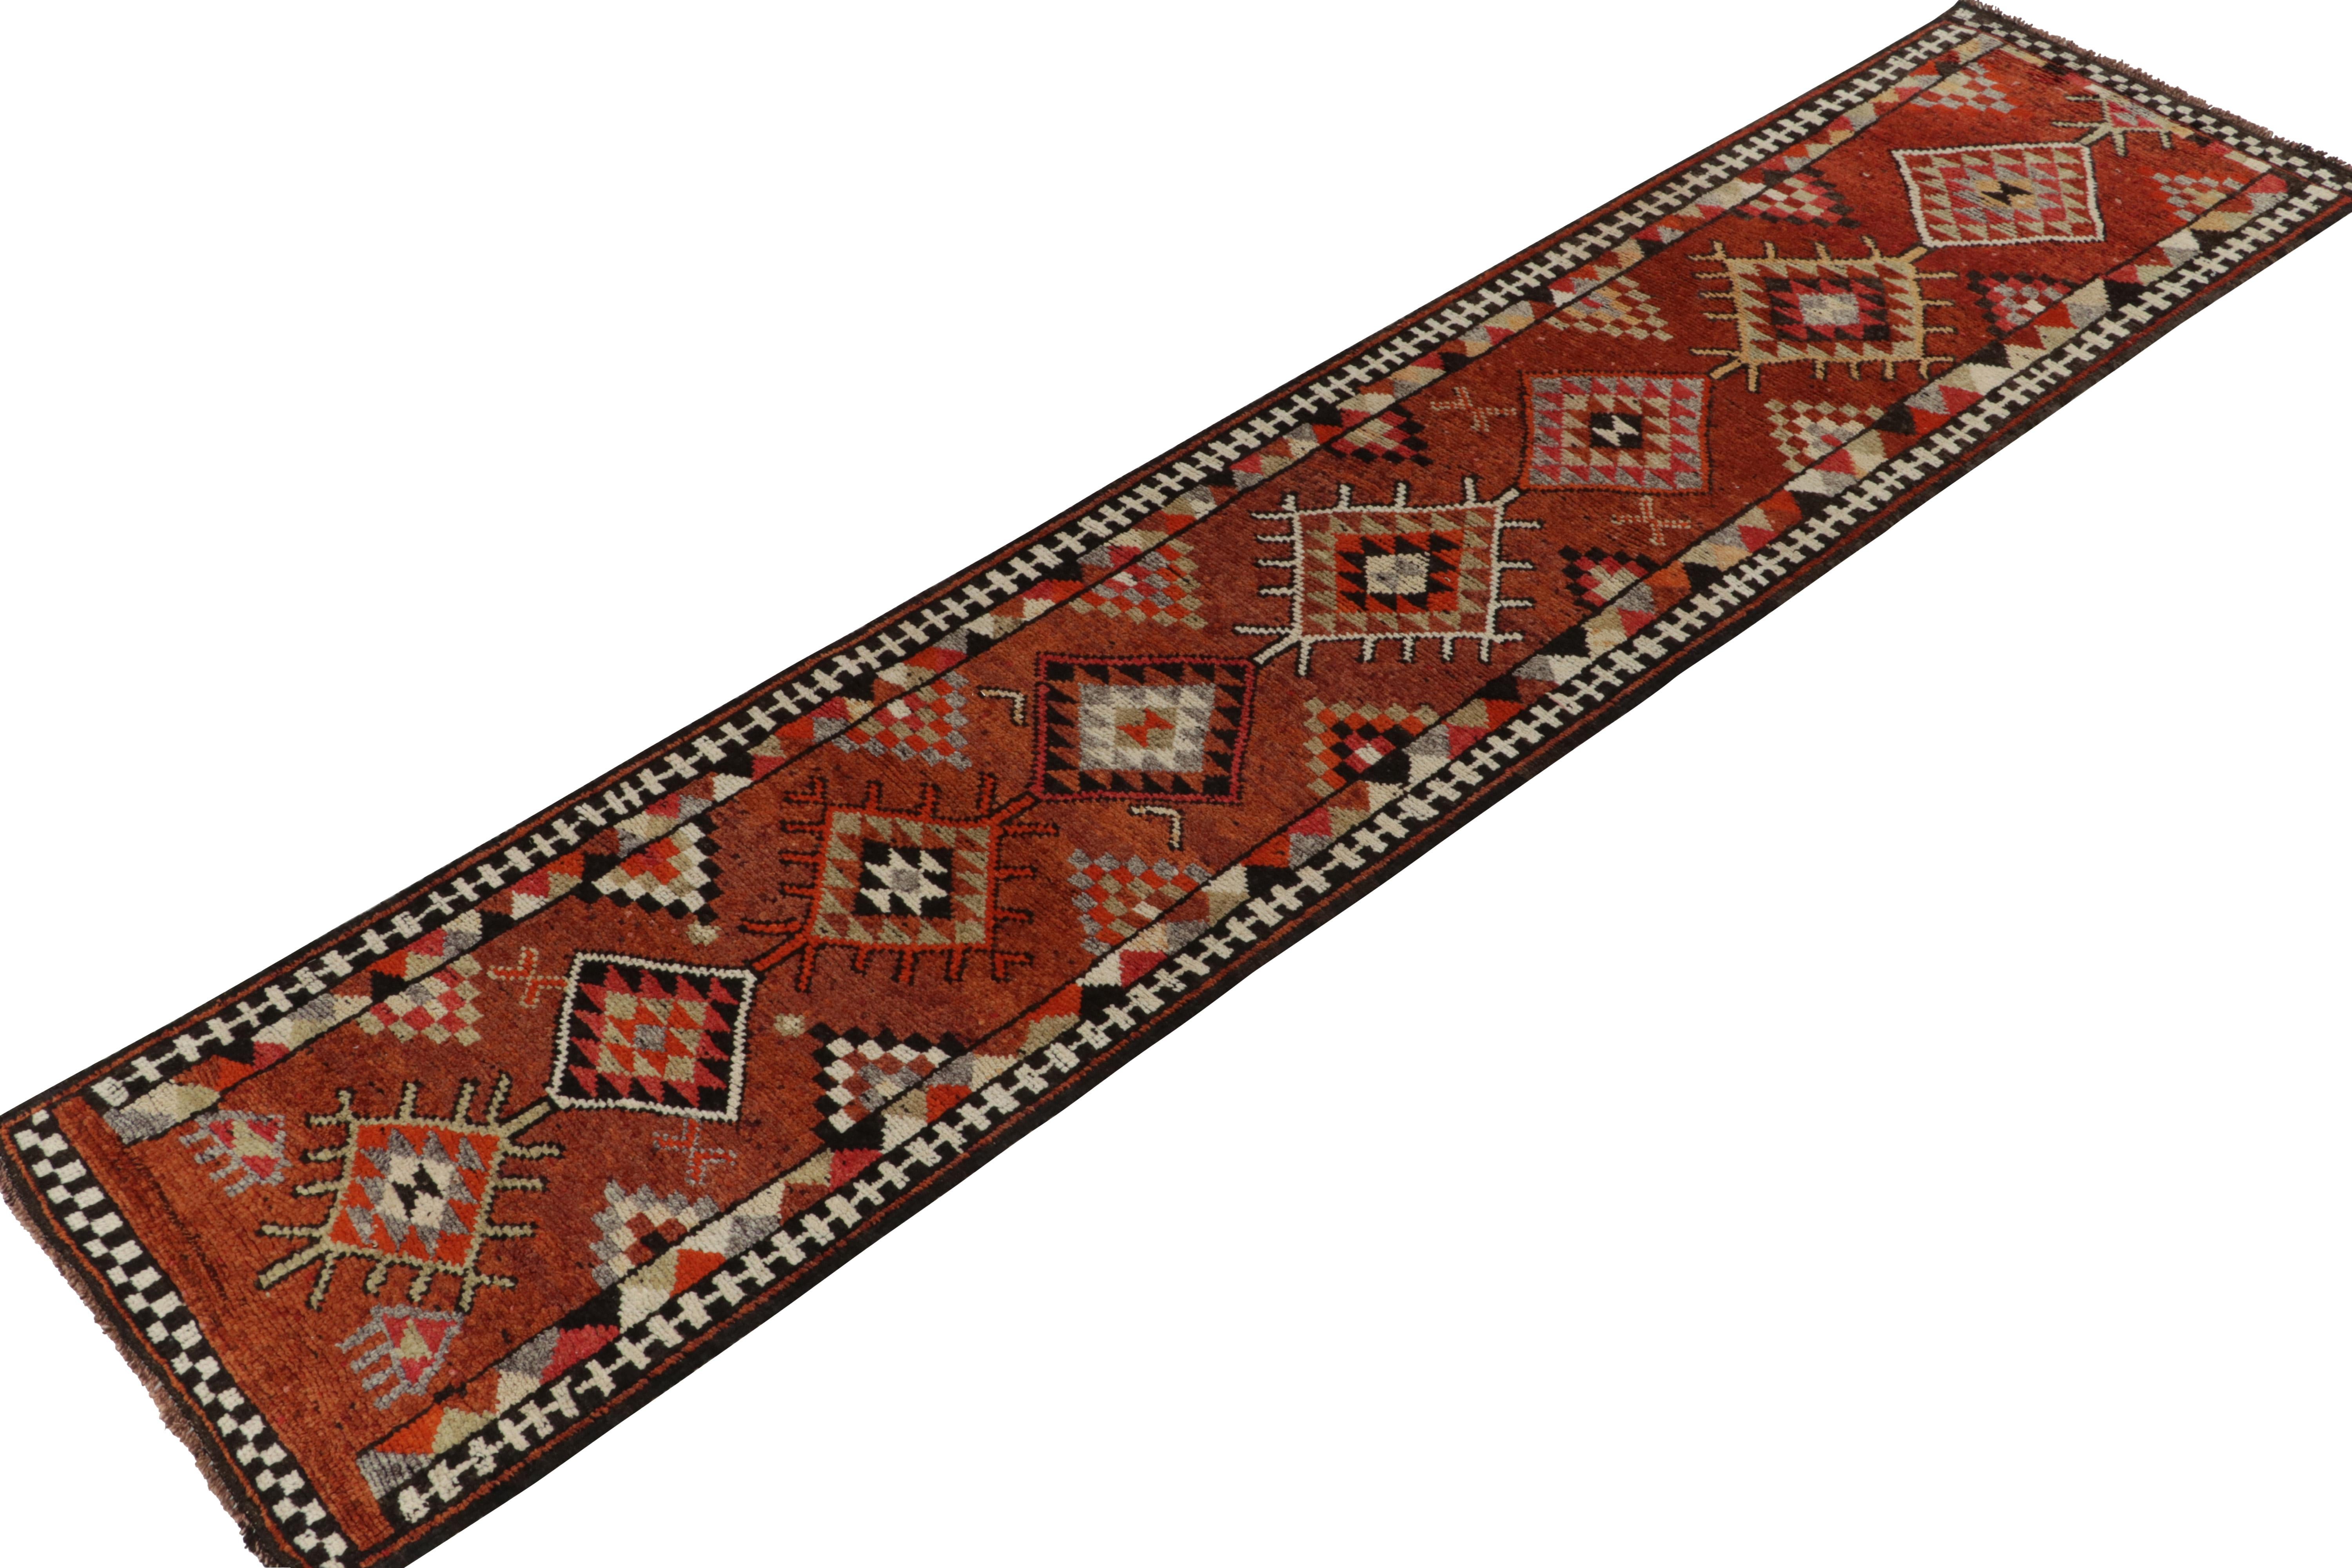 From R&K Principal Josh Nazmiyal’s latest acquisitions, a distinct vintage runner originating from Turkey circa 1950-1960. 

On the Design: The symmetric geometric design features traditional motifs encased in diamond patterns, repeating from end to